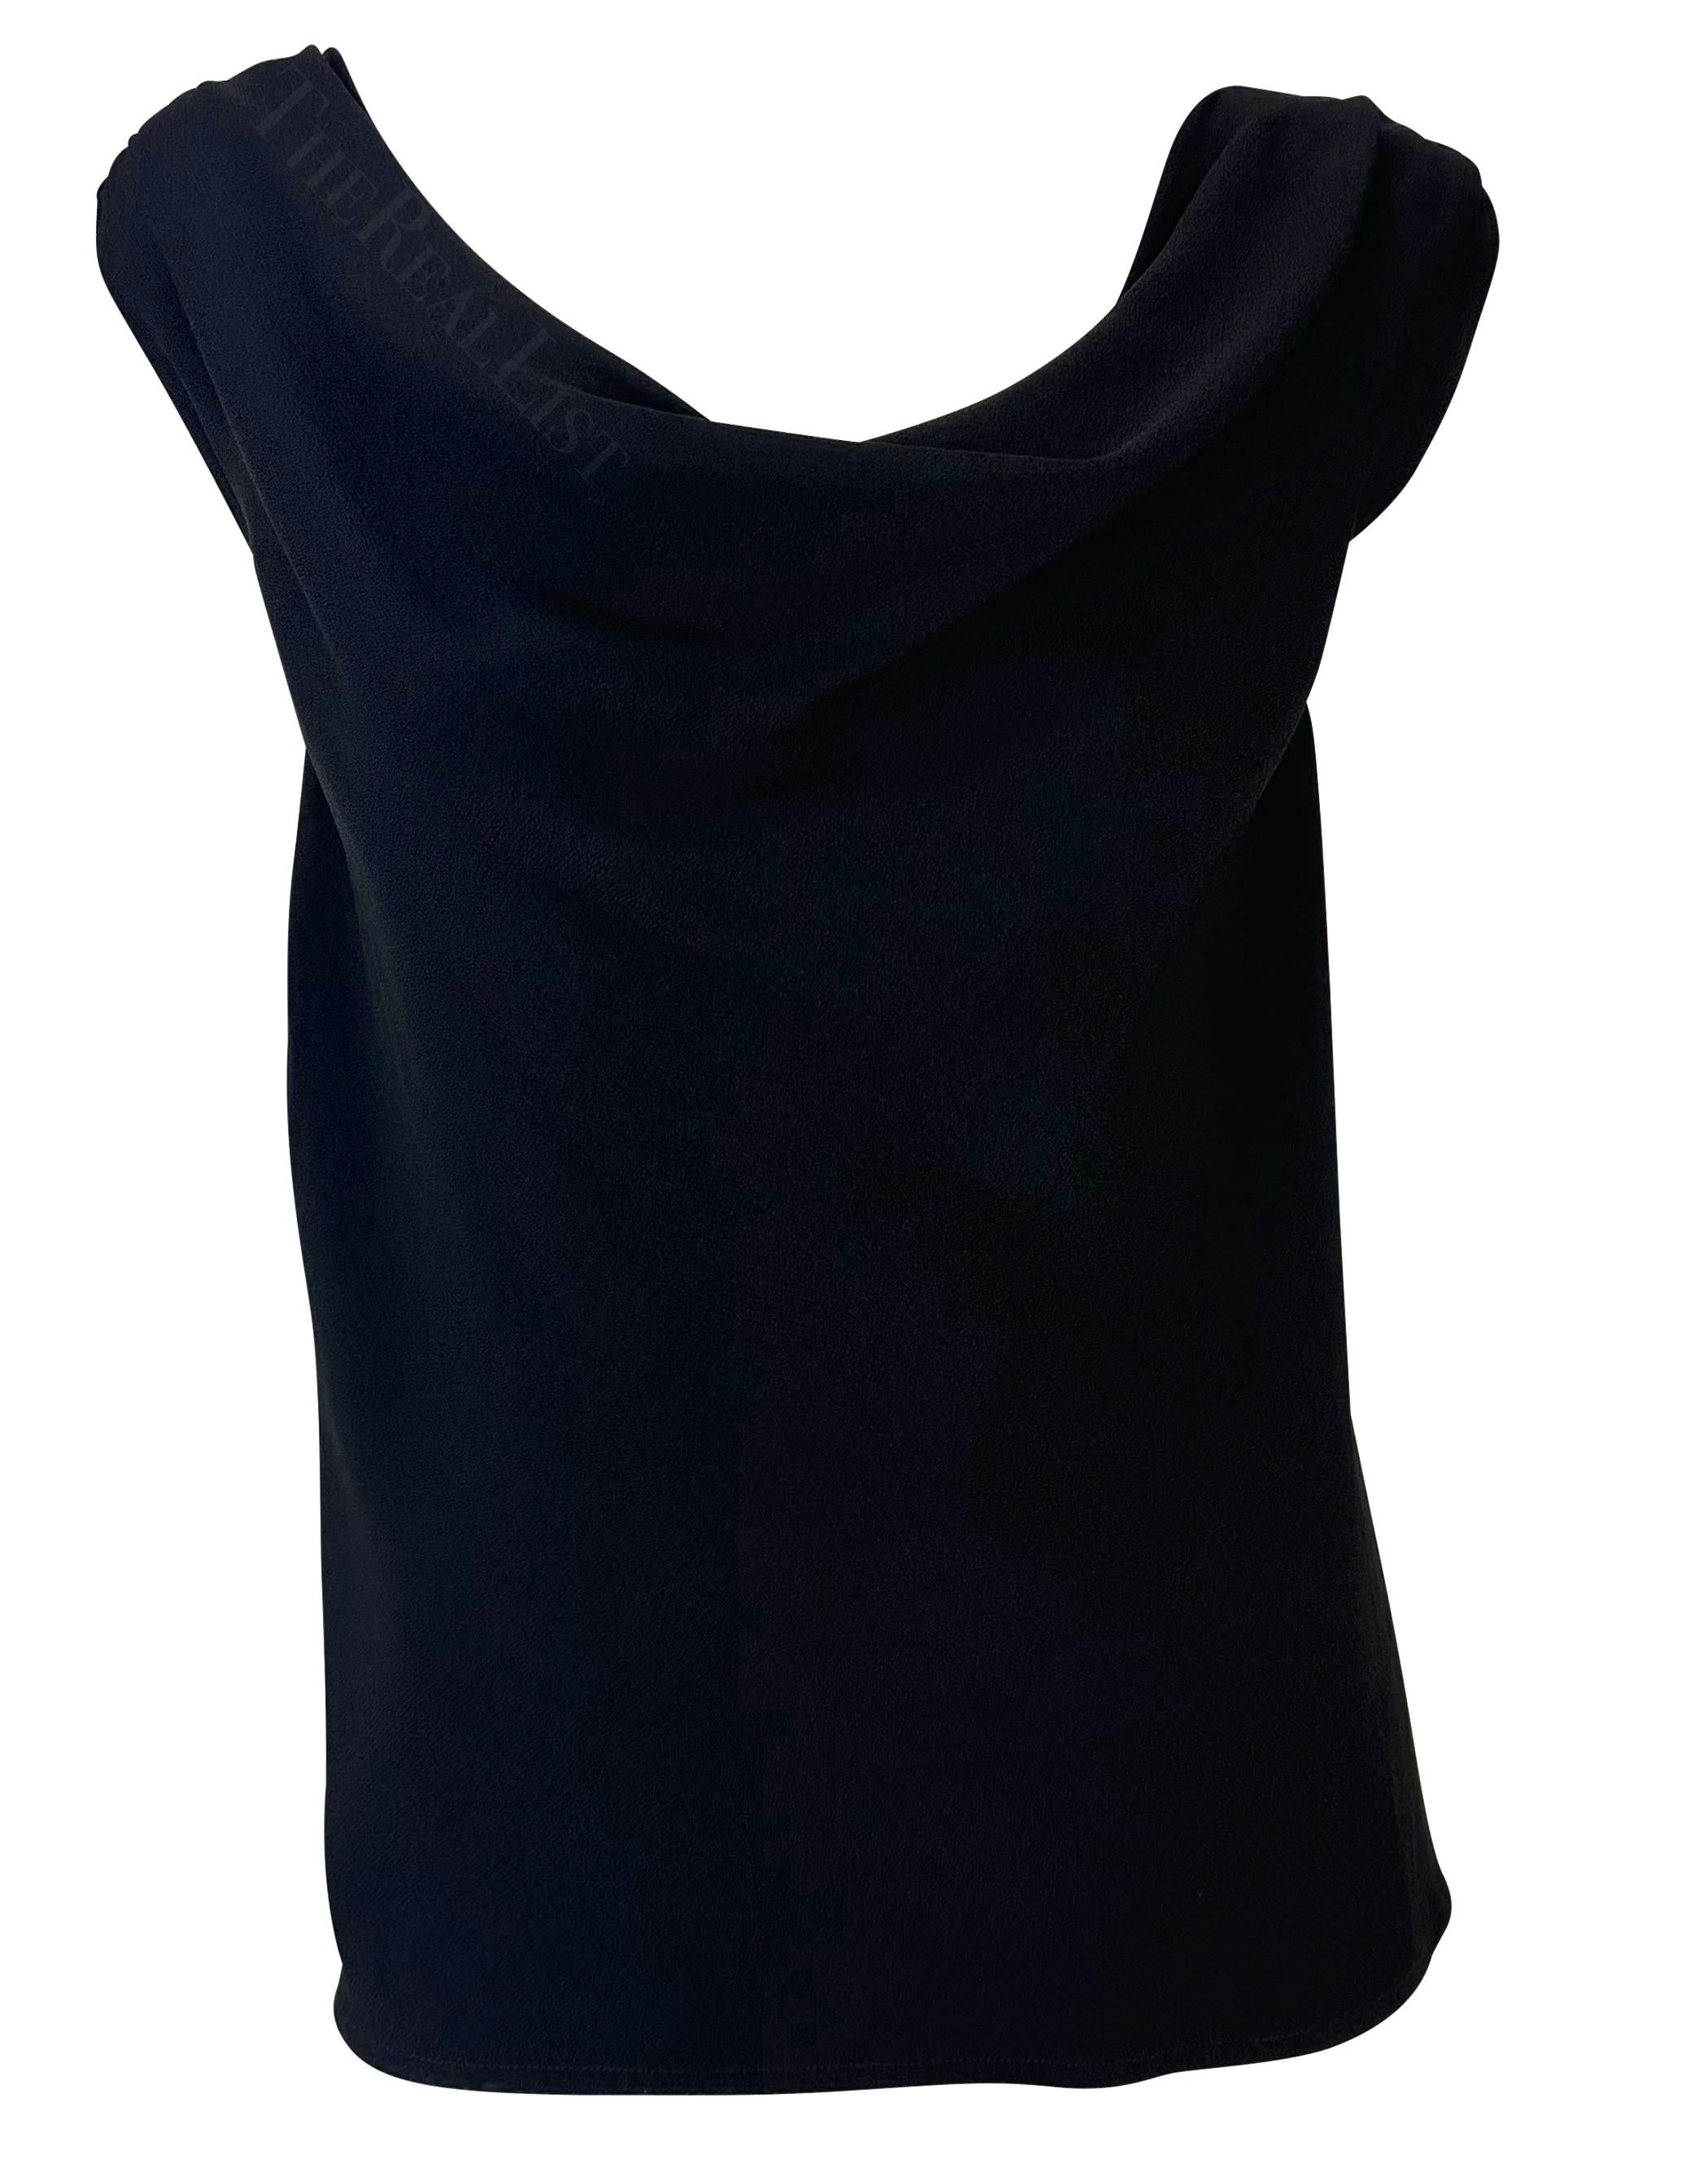 Presenting a chic black Saint Laurent Rive Gauche top, designed by Yves Saint Laurent. From the 1980s, this sleeveless top features a wide scoop neckline, cowl neck, and off-the-shoulder petal sleeves. Perfectly timeless, this vintage top is a